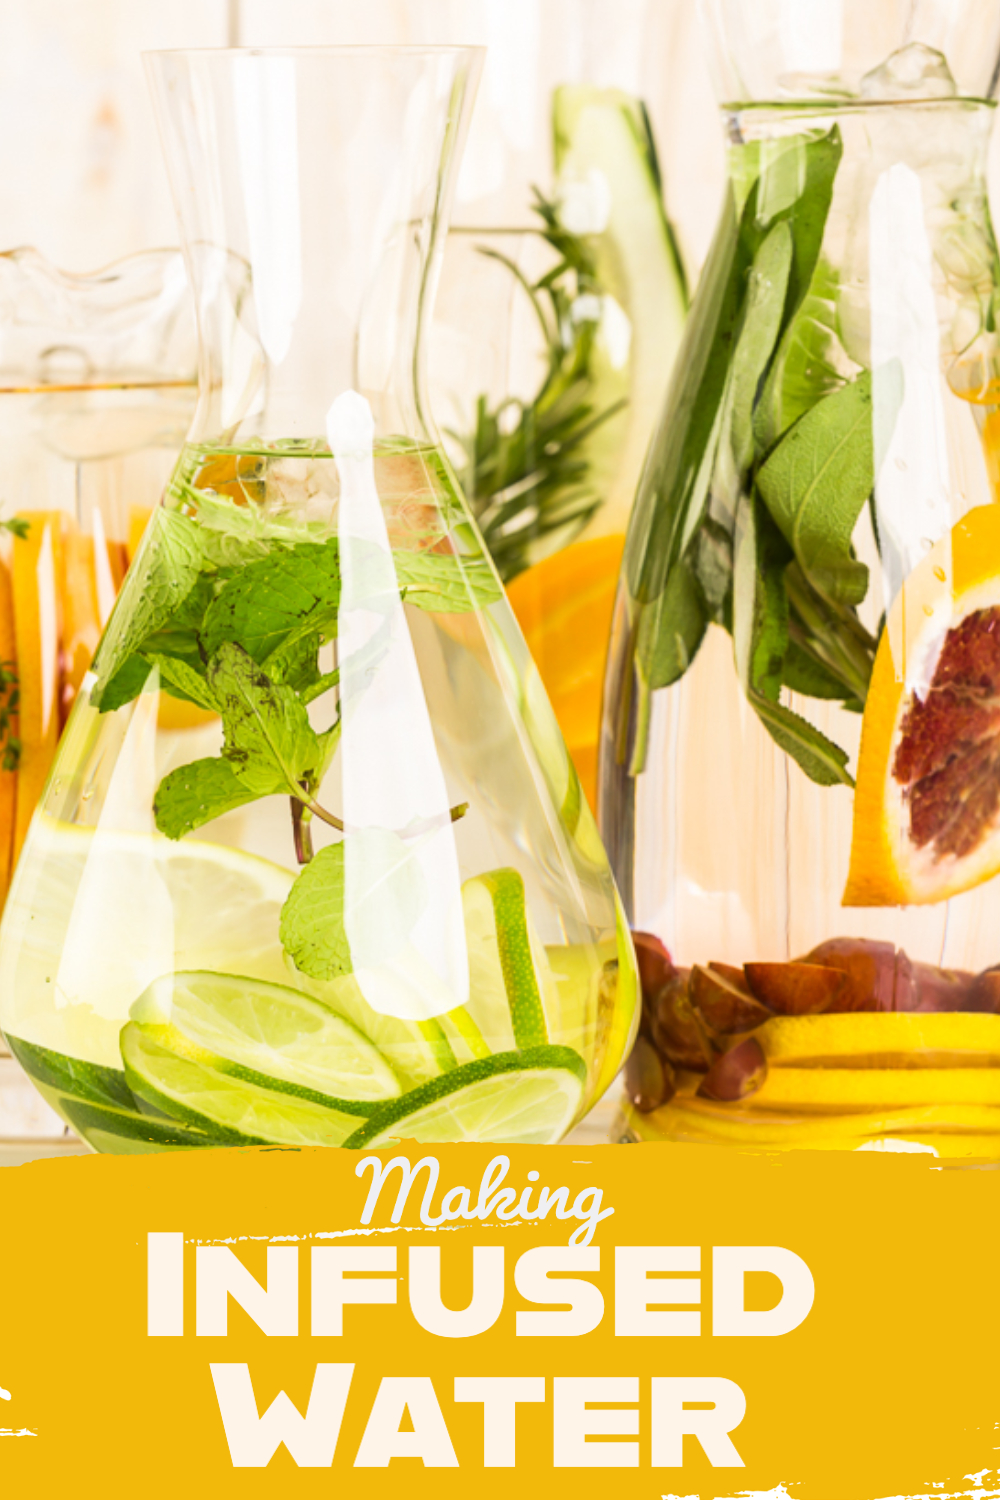 Making Infused Water